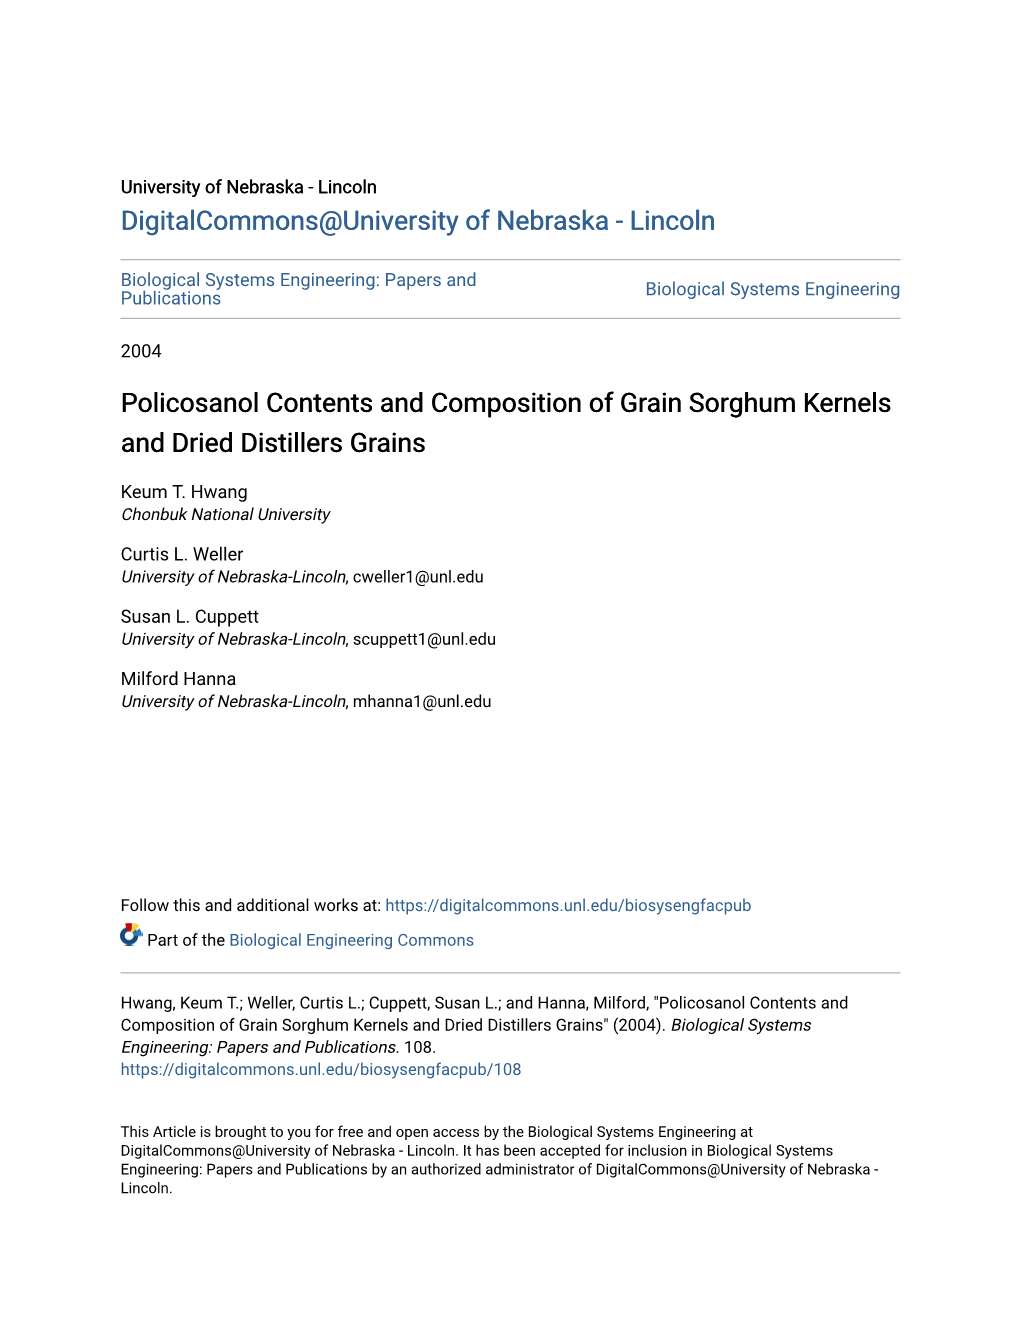 Policosanol Contents and Composition of Grain Sorghum Kernels and Dried Distillers Grains